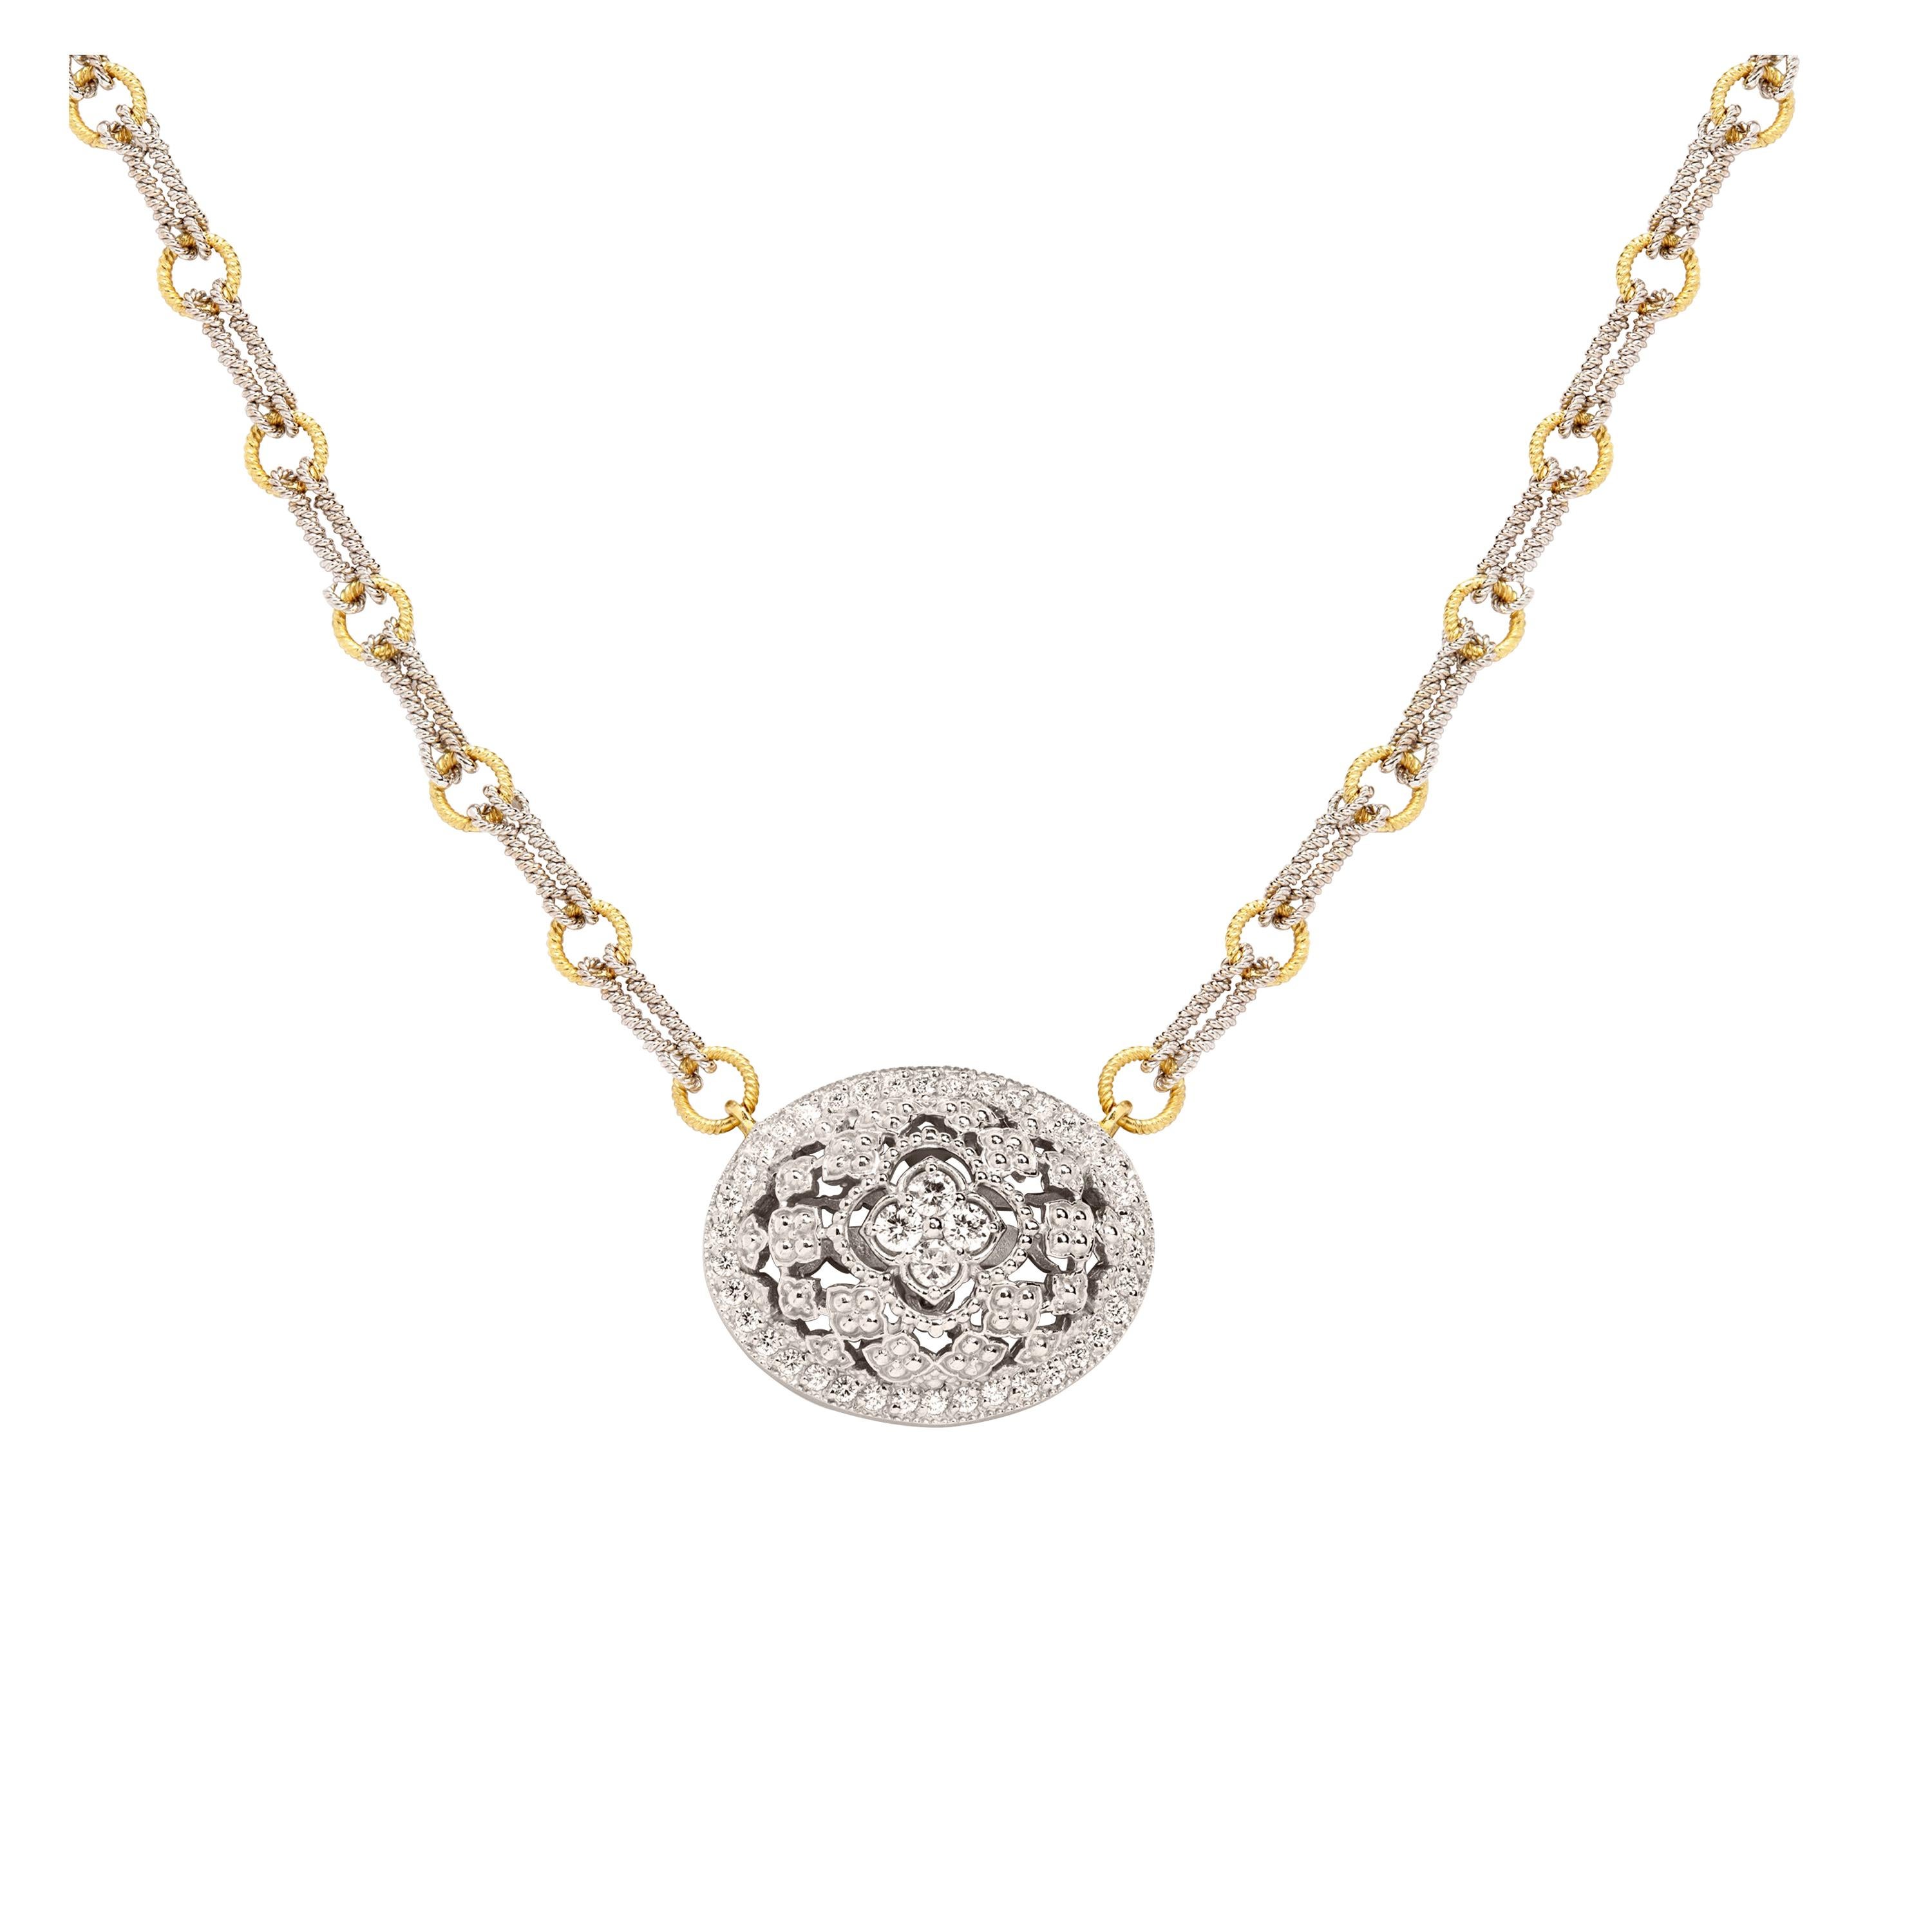 Stambolian Two-Tone White Yellow Gold and Diamond Oval Pendant Chain Necklace